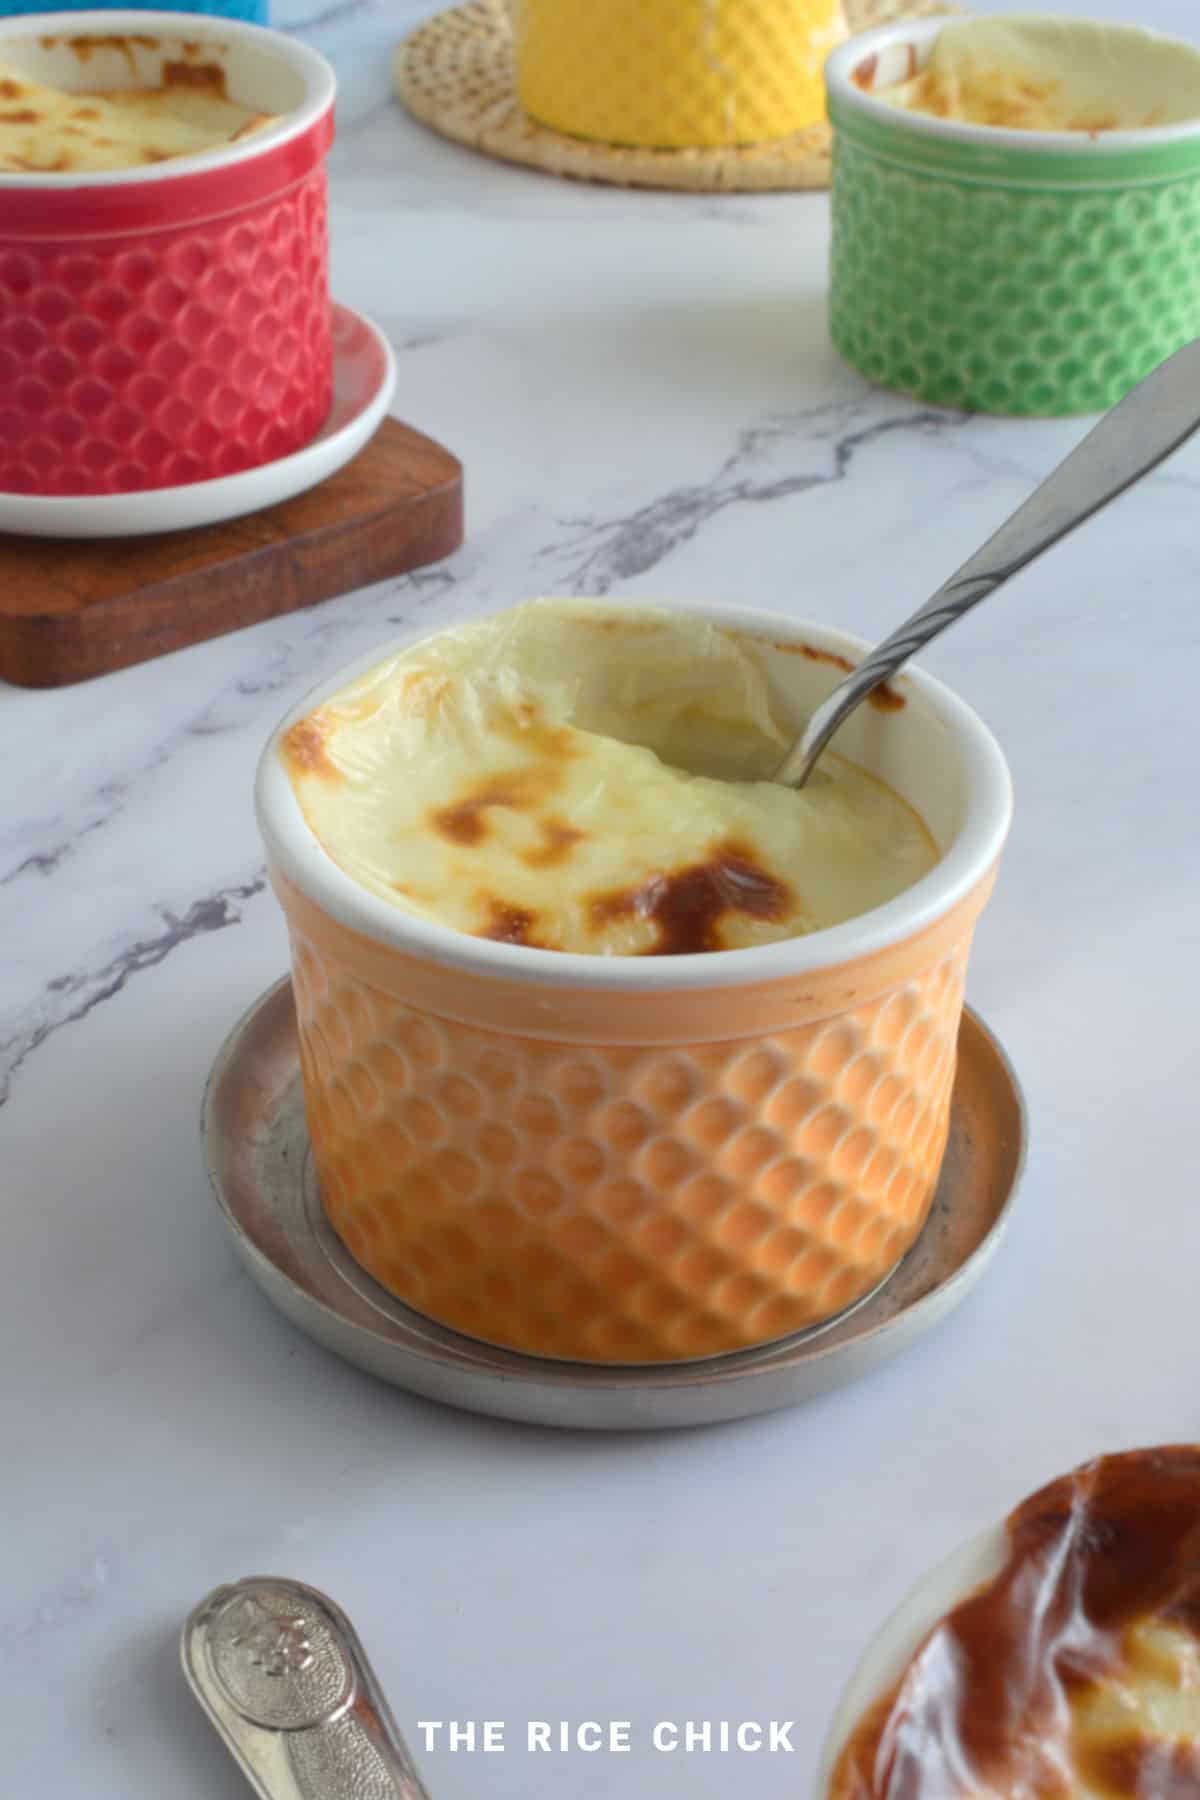 Baked rice pudding with a spoon.